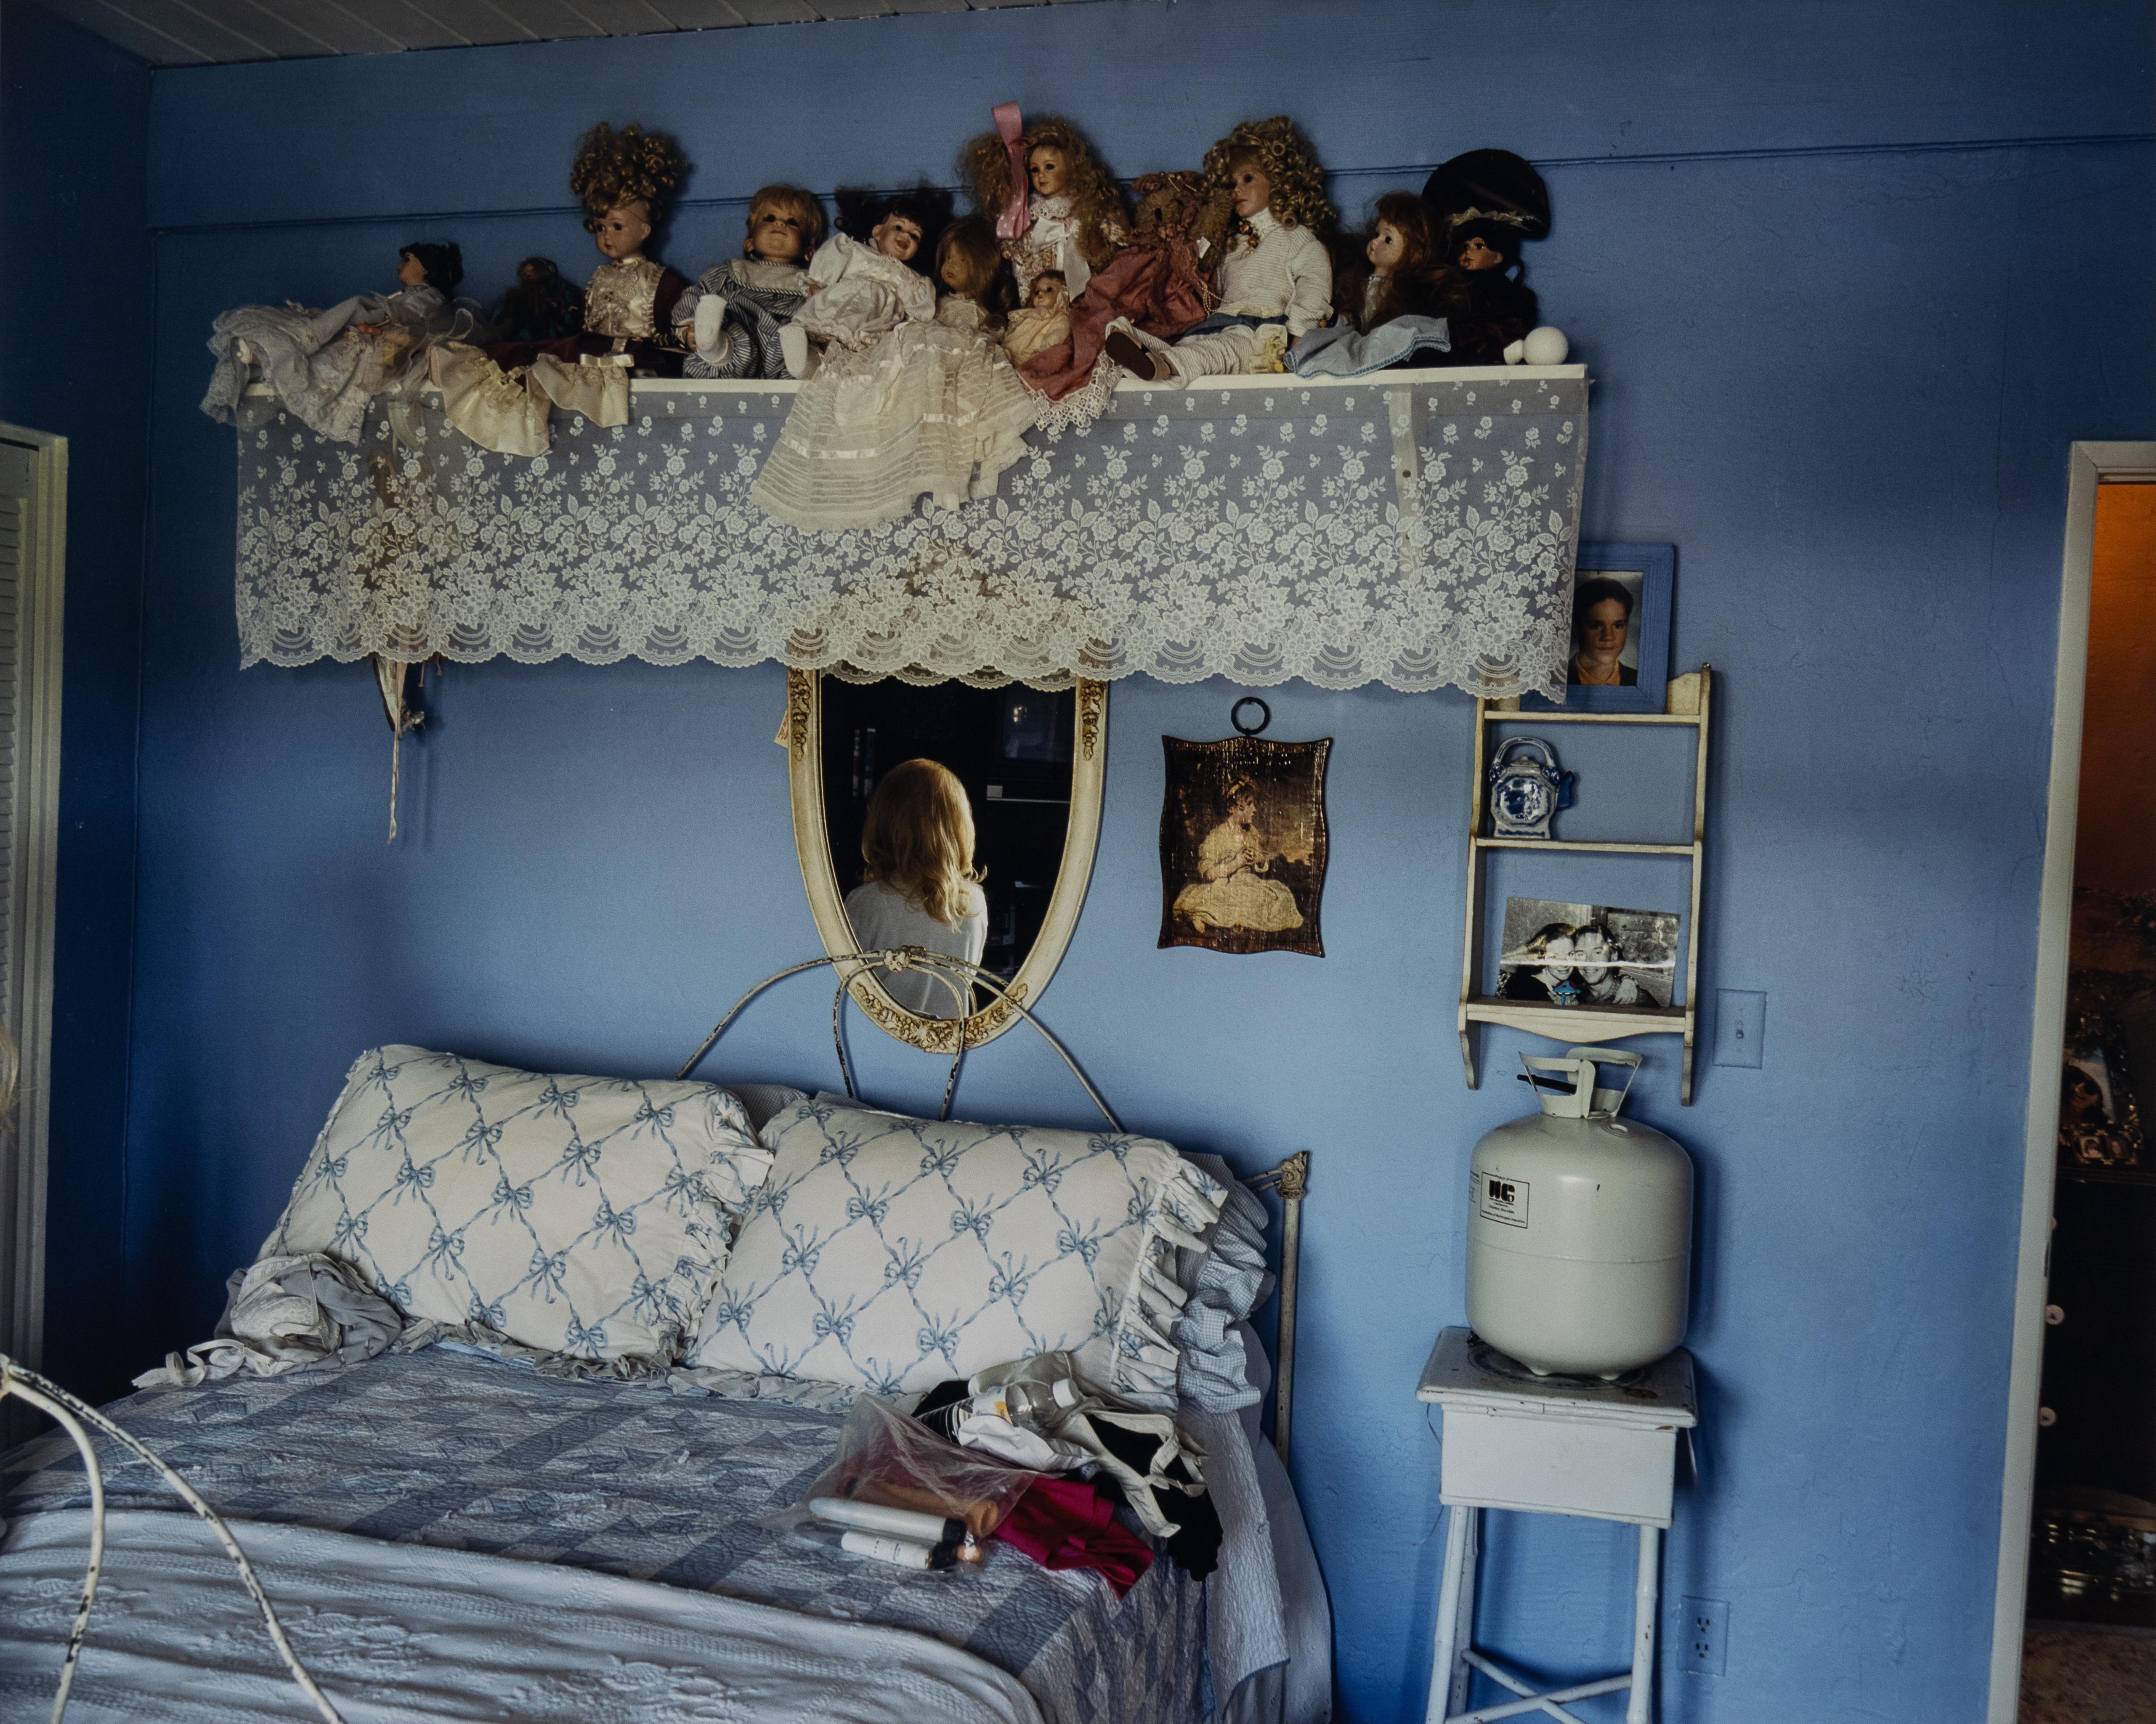 Child's Bedroom - Photograph by Larry Sultan